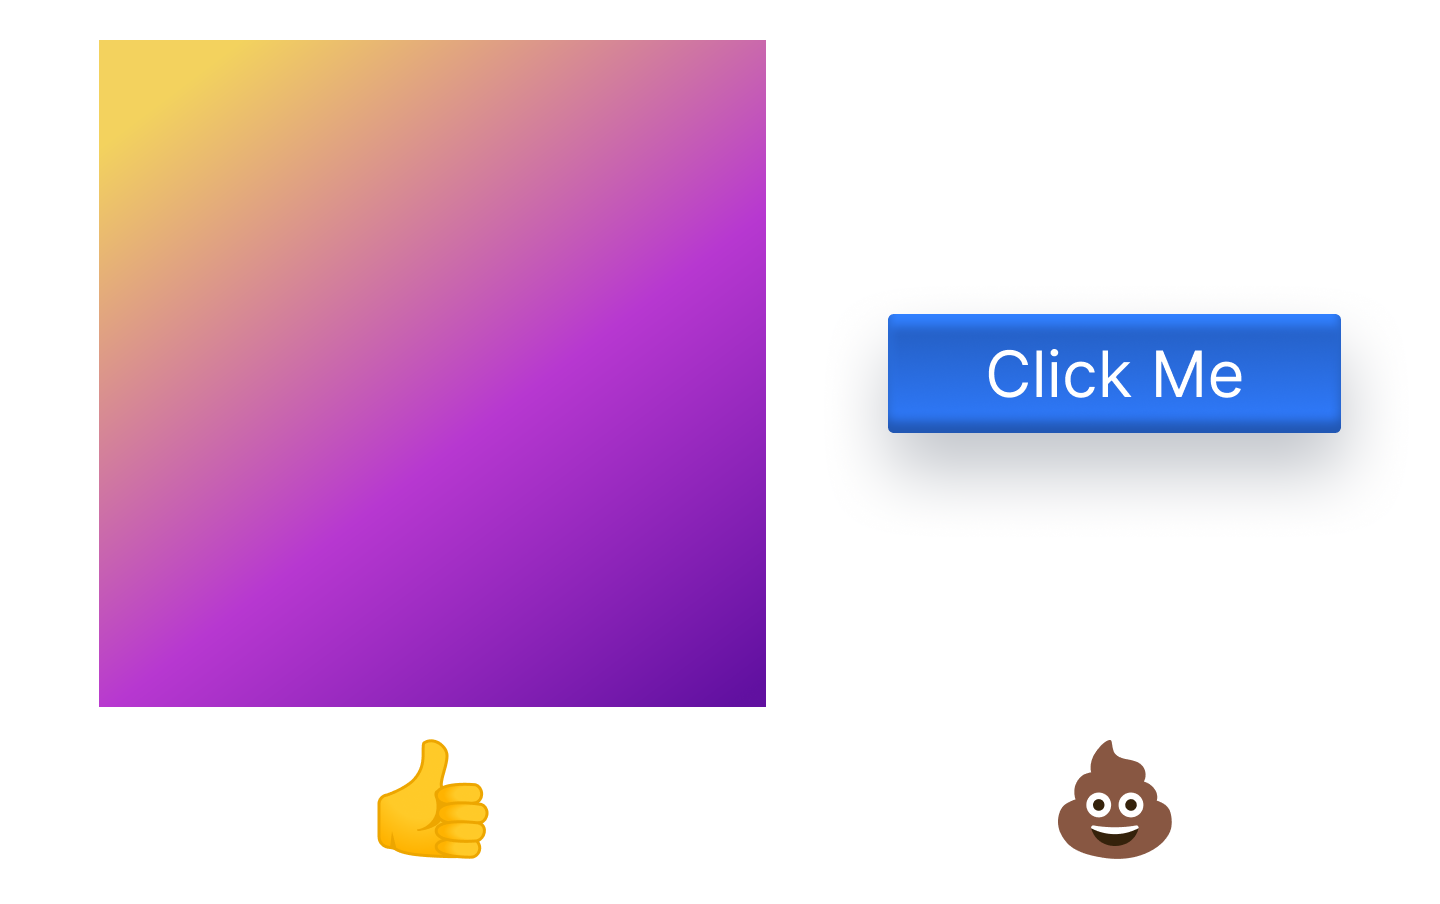 Image showing a modern gradient background on the left with a thumbs-up emoji underneath. On the right is an old-style button with a poo icon beneath.